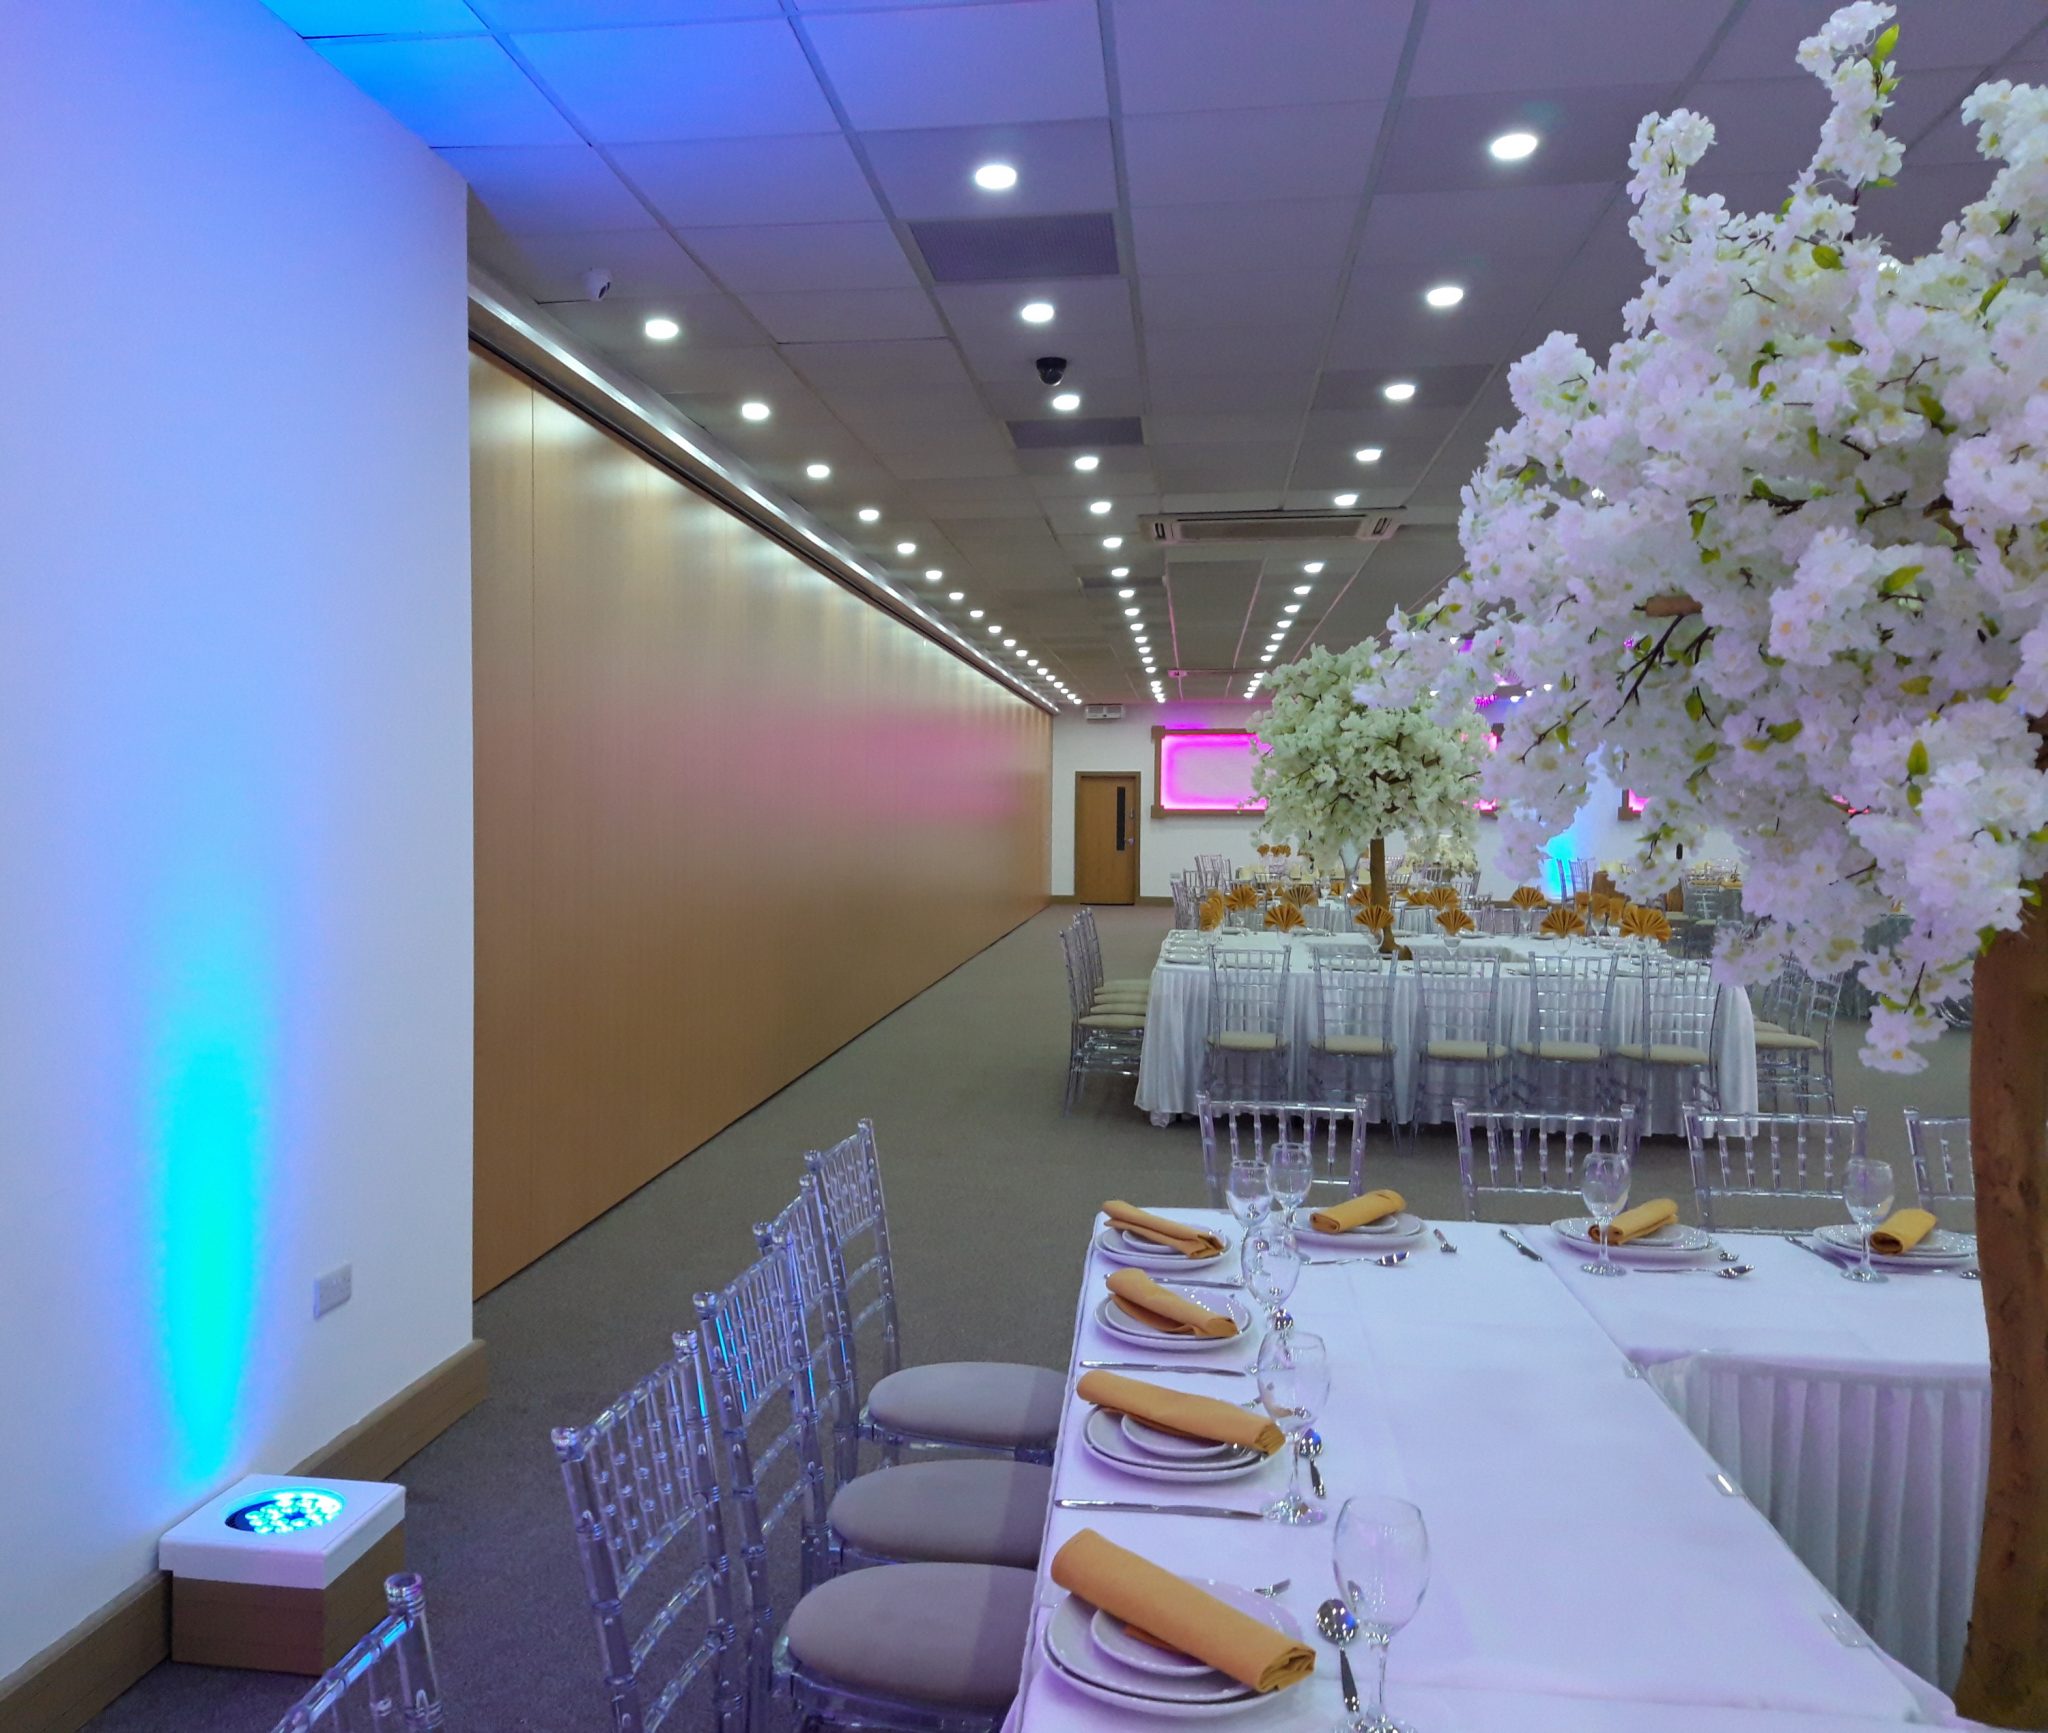 Style operable walls produce flexible space for Crown Banqueting